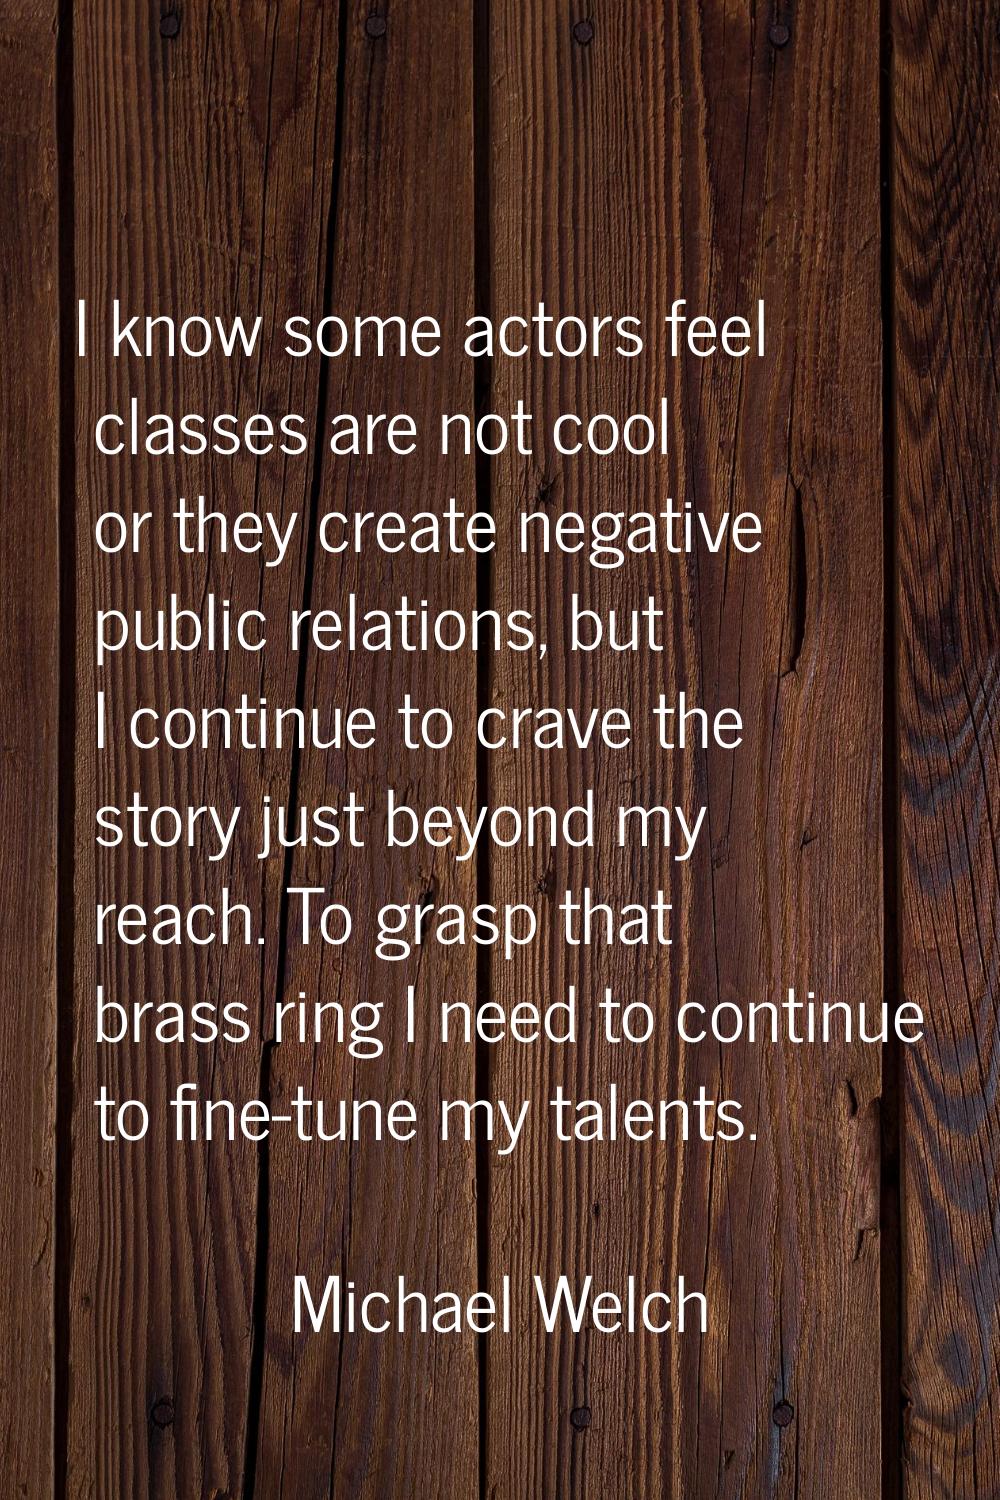 I know some actors feel classes are not cool or they create negative public relations, but I contin